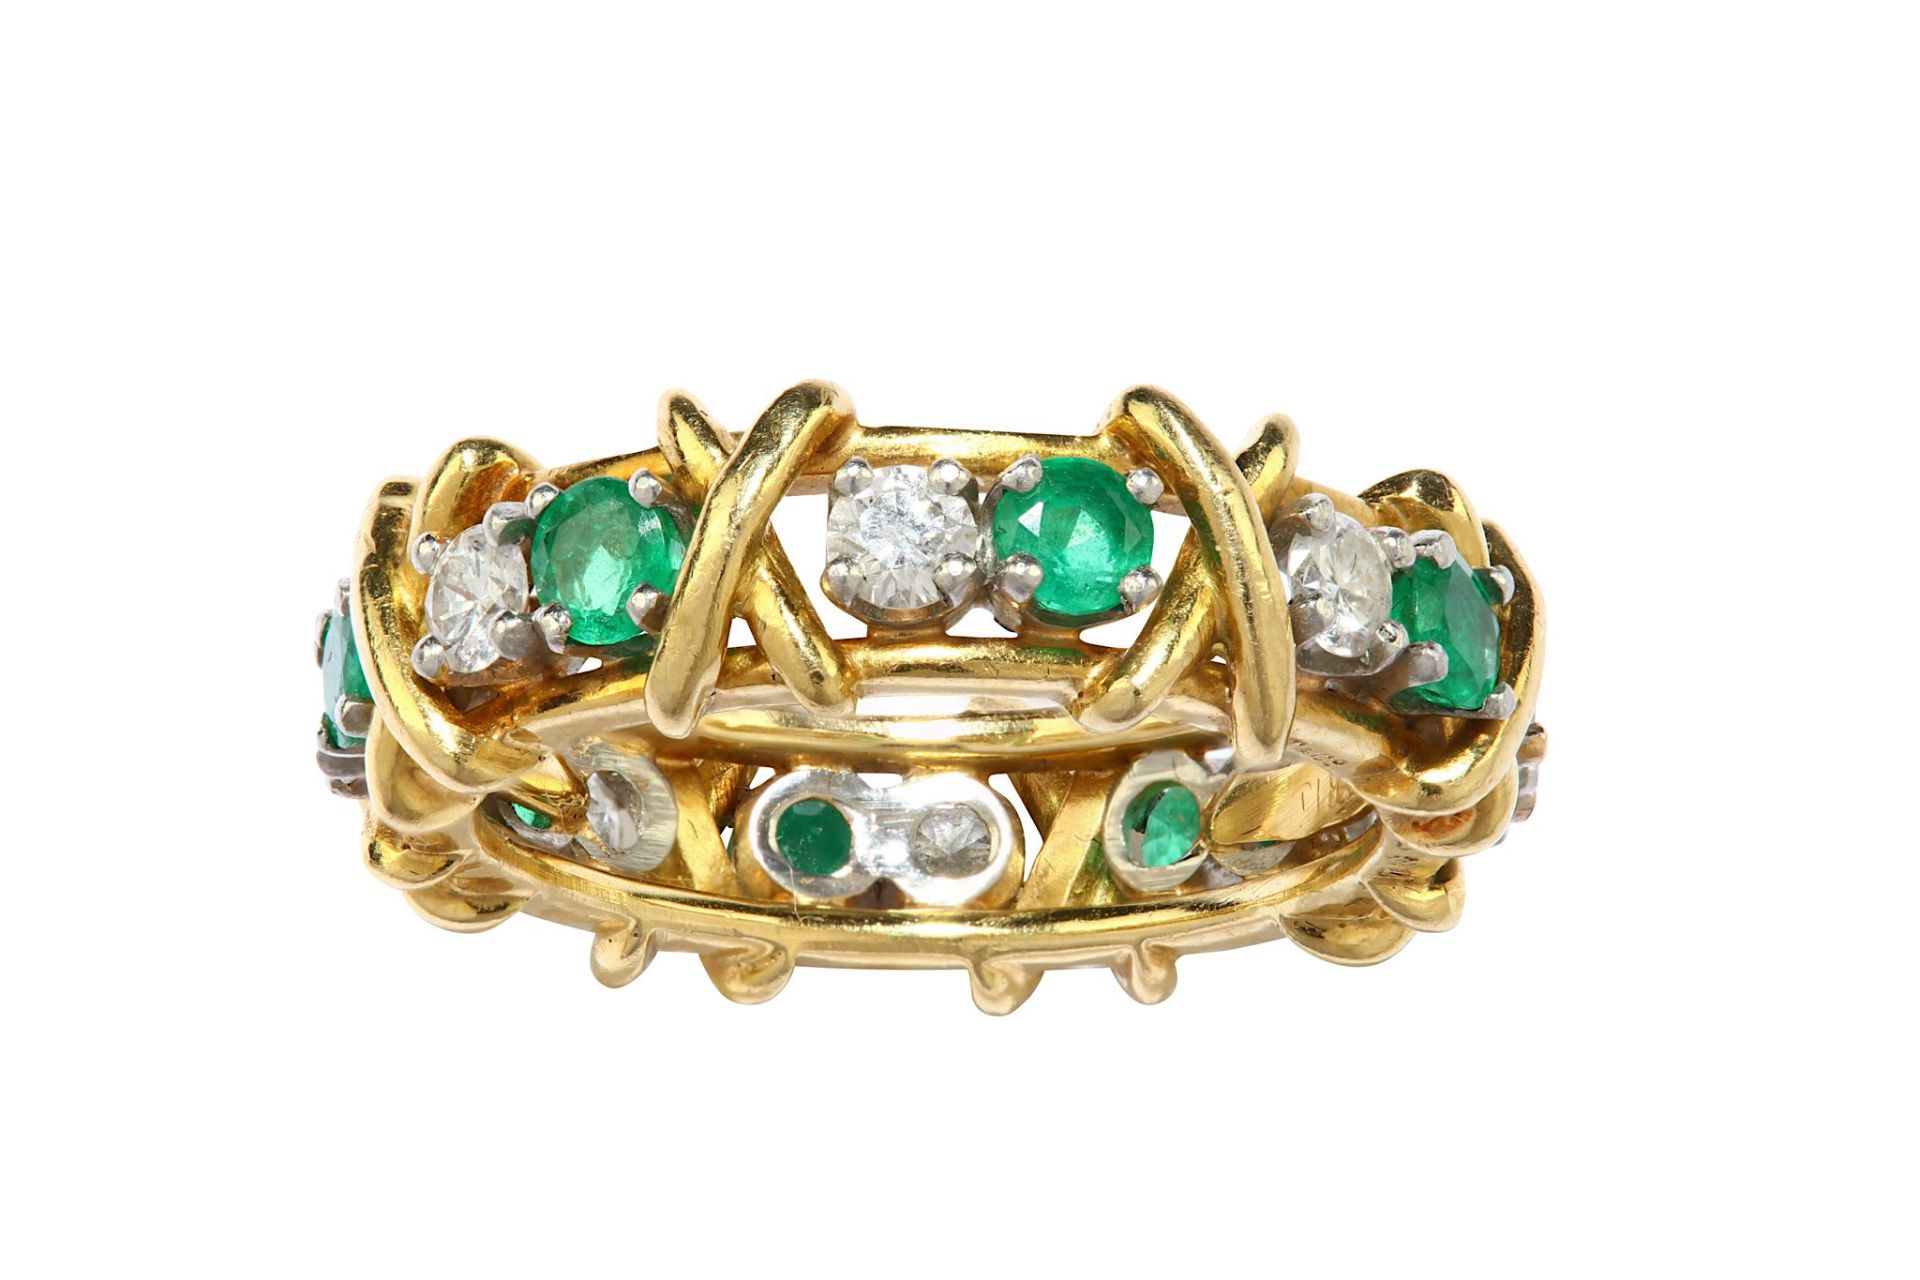 An emerald and diamond 'Sixteen Stones' ring,  by Schlumberger for Tiffany & Co.